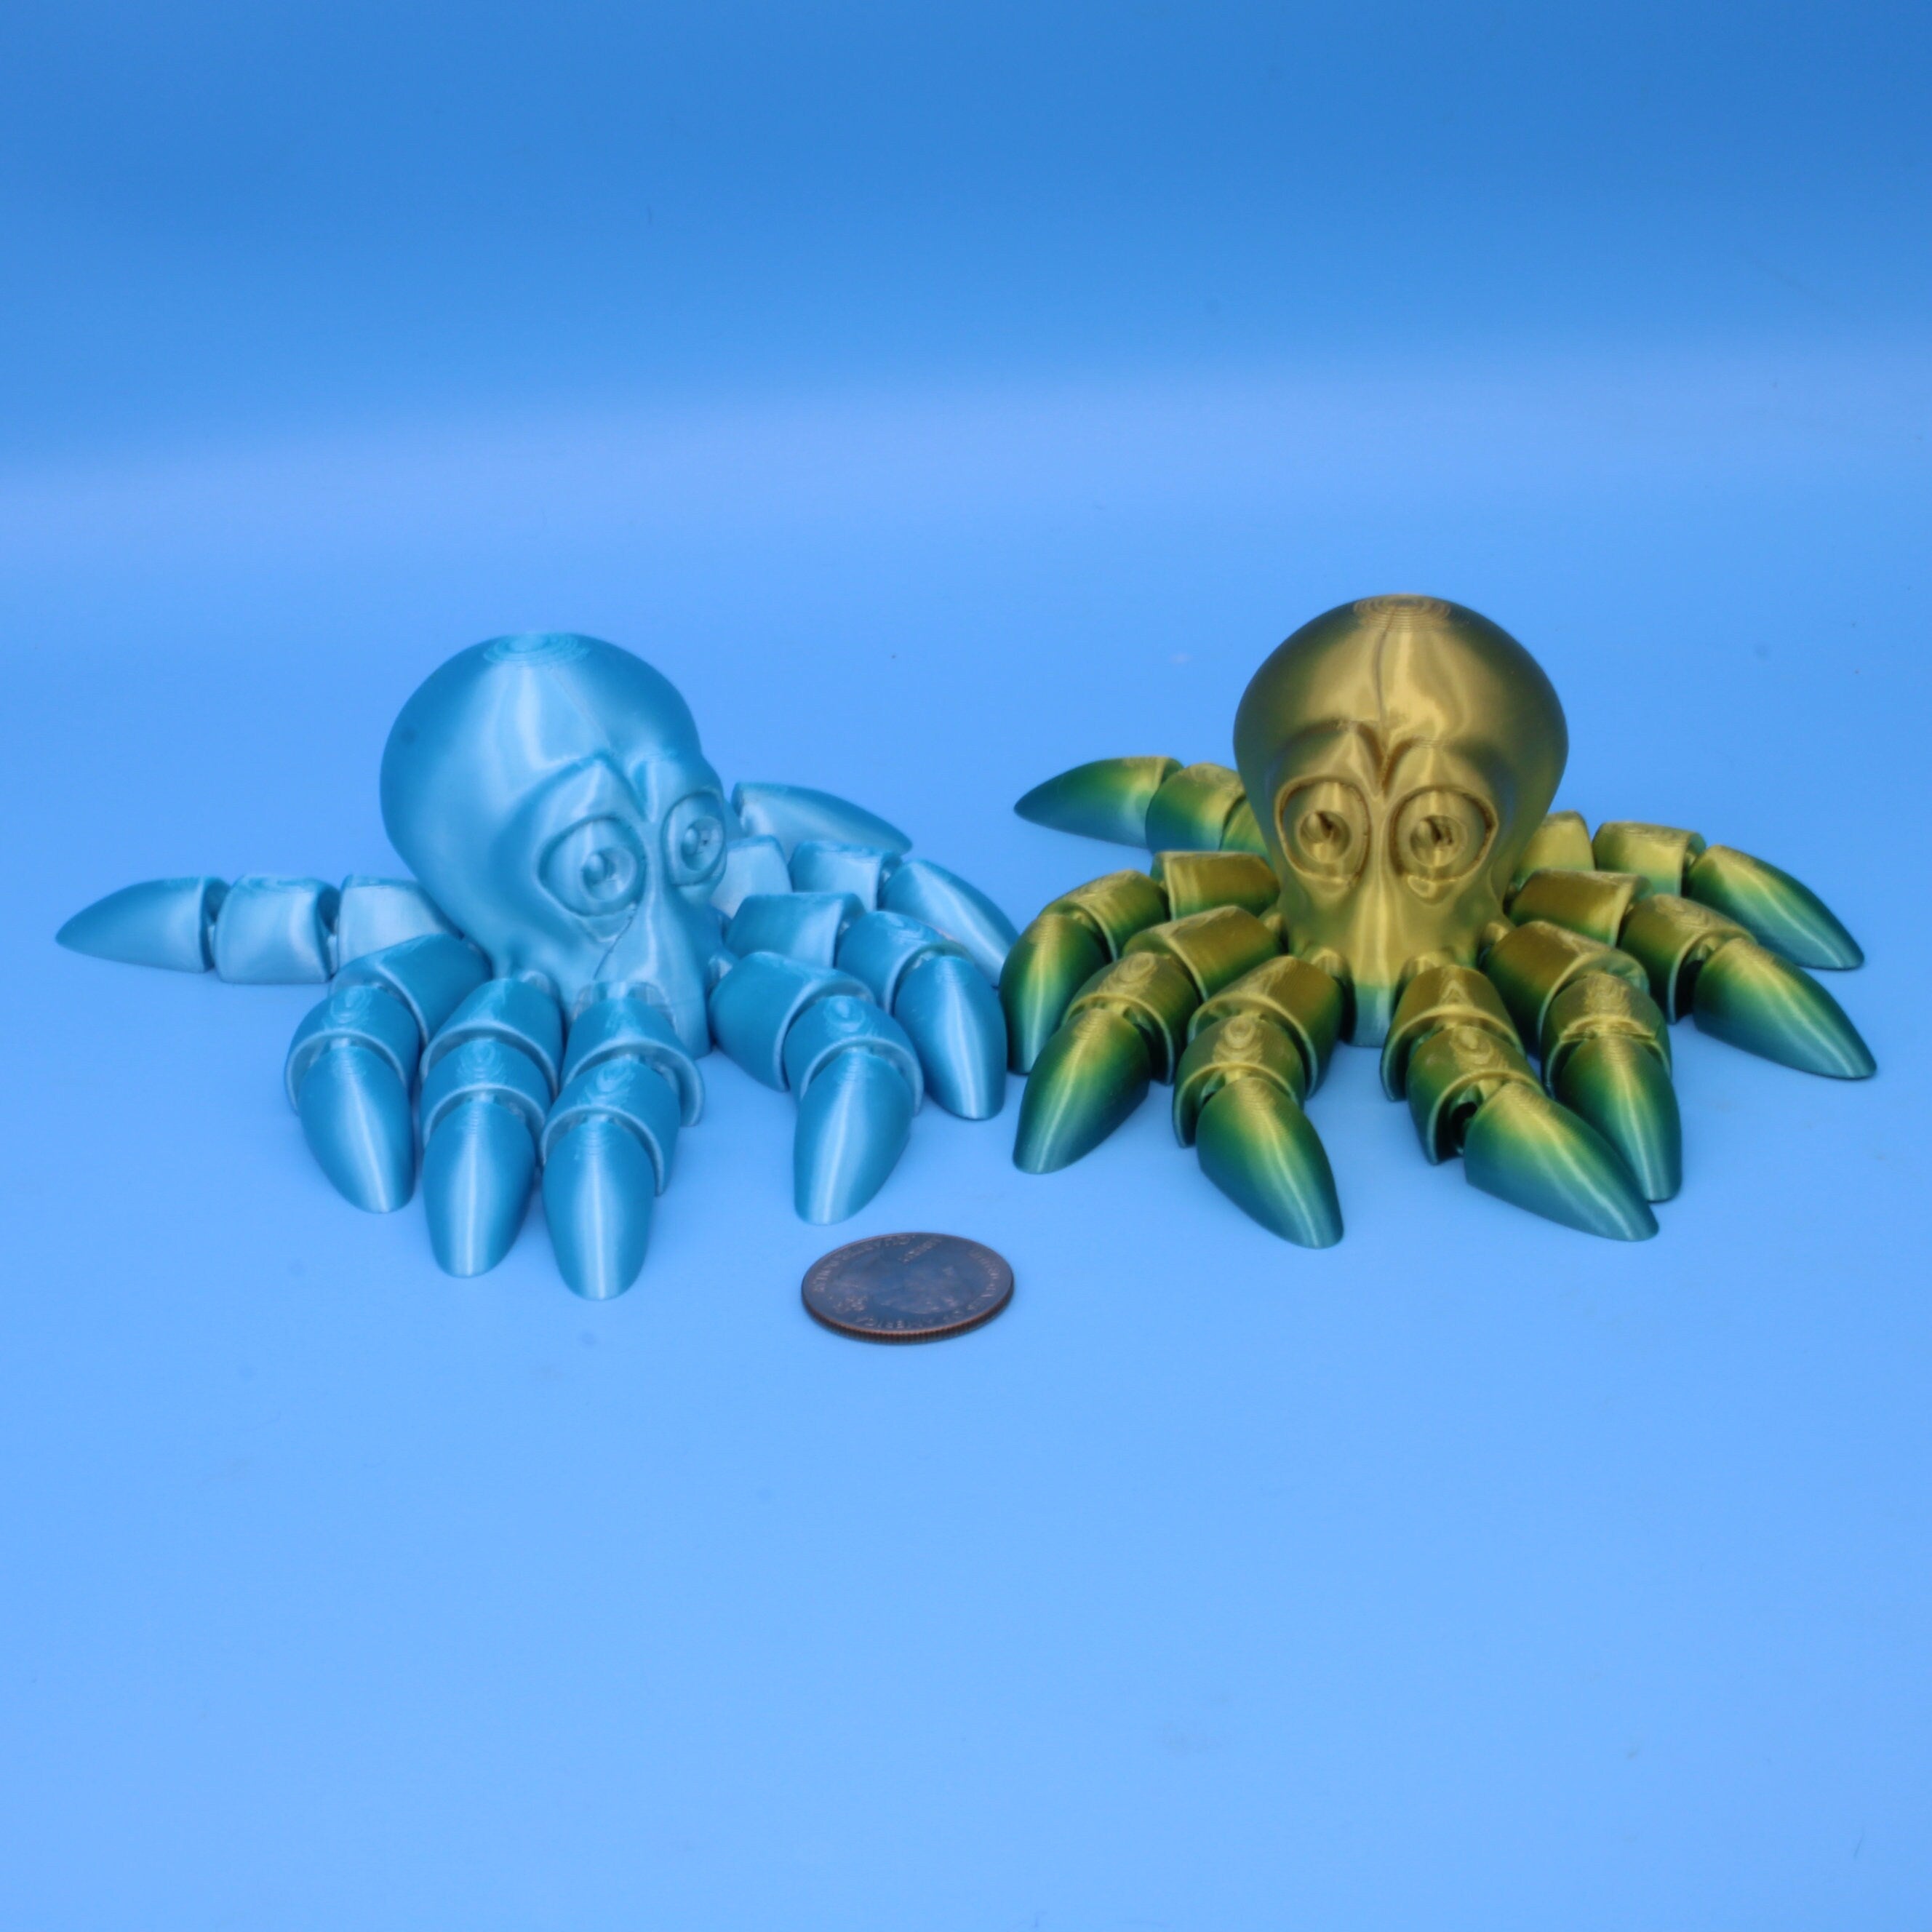 Clingy The Octopus Set - 3D Printed